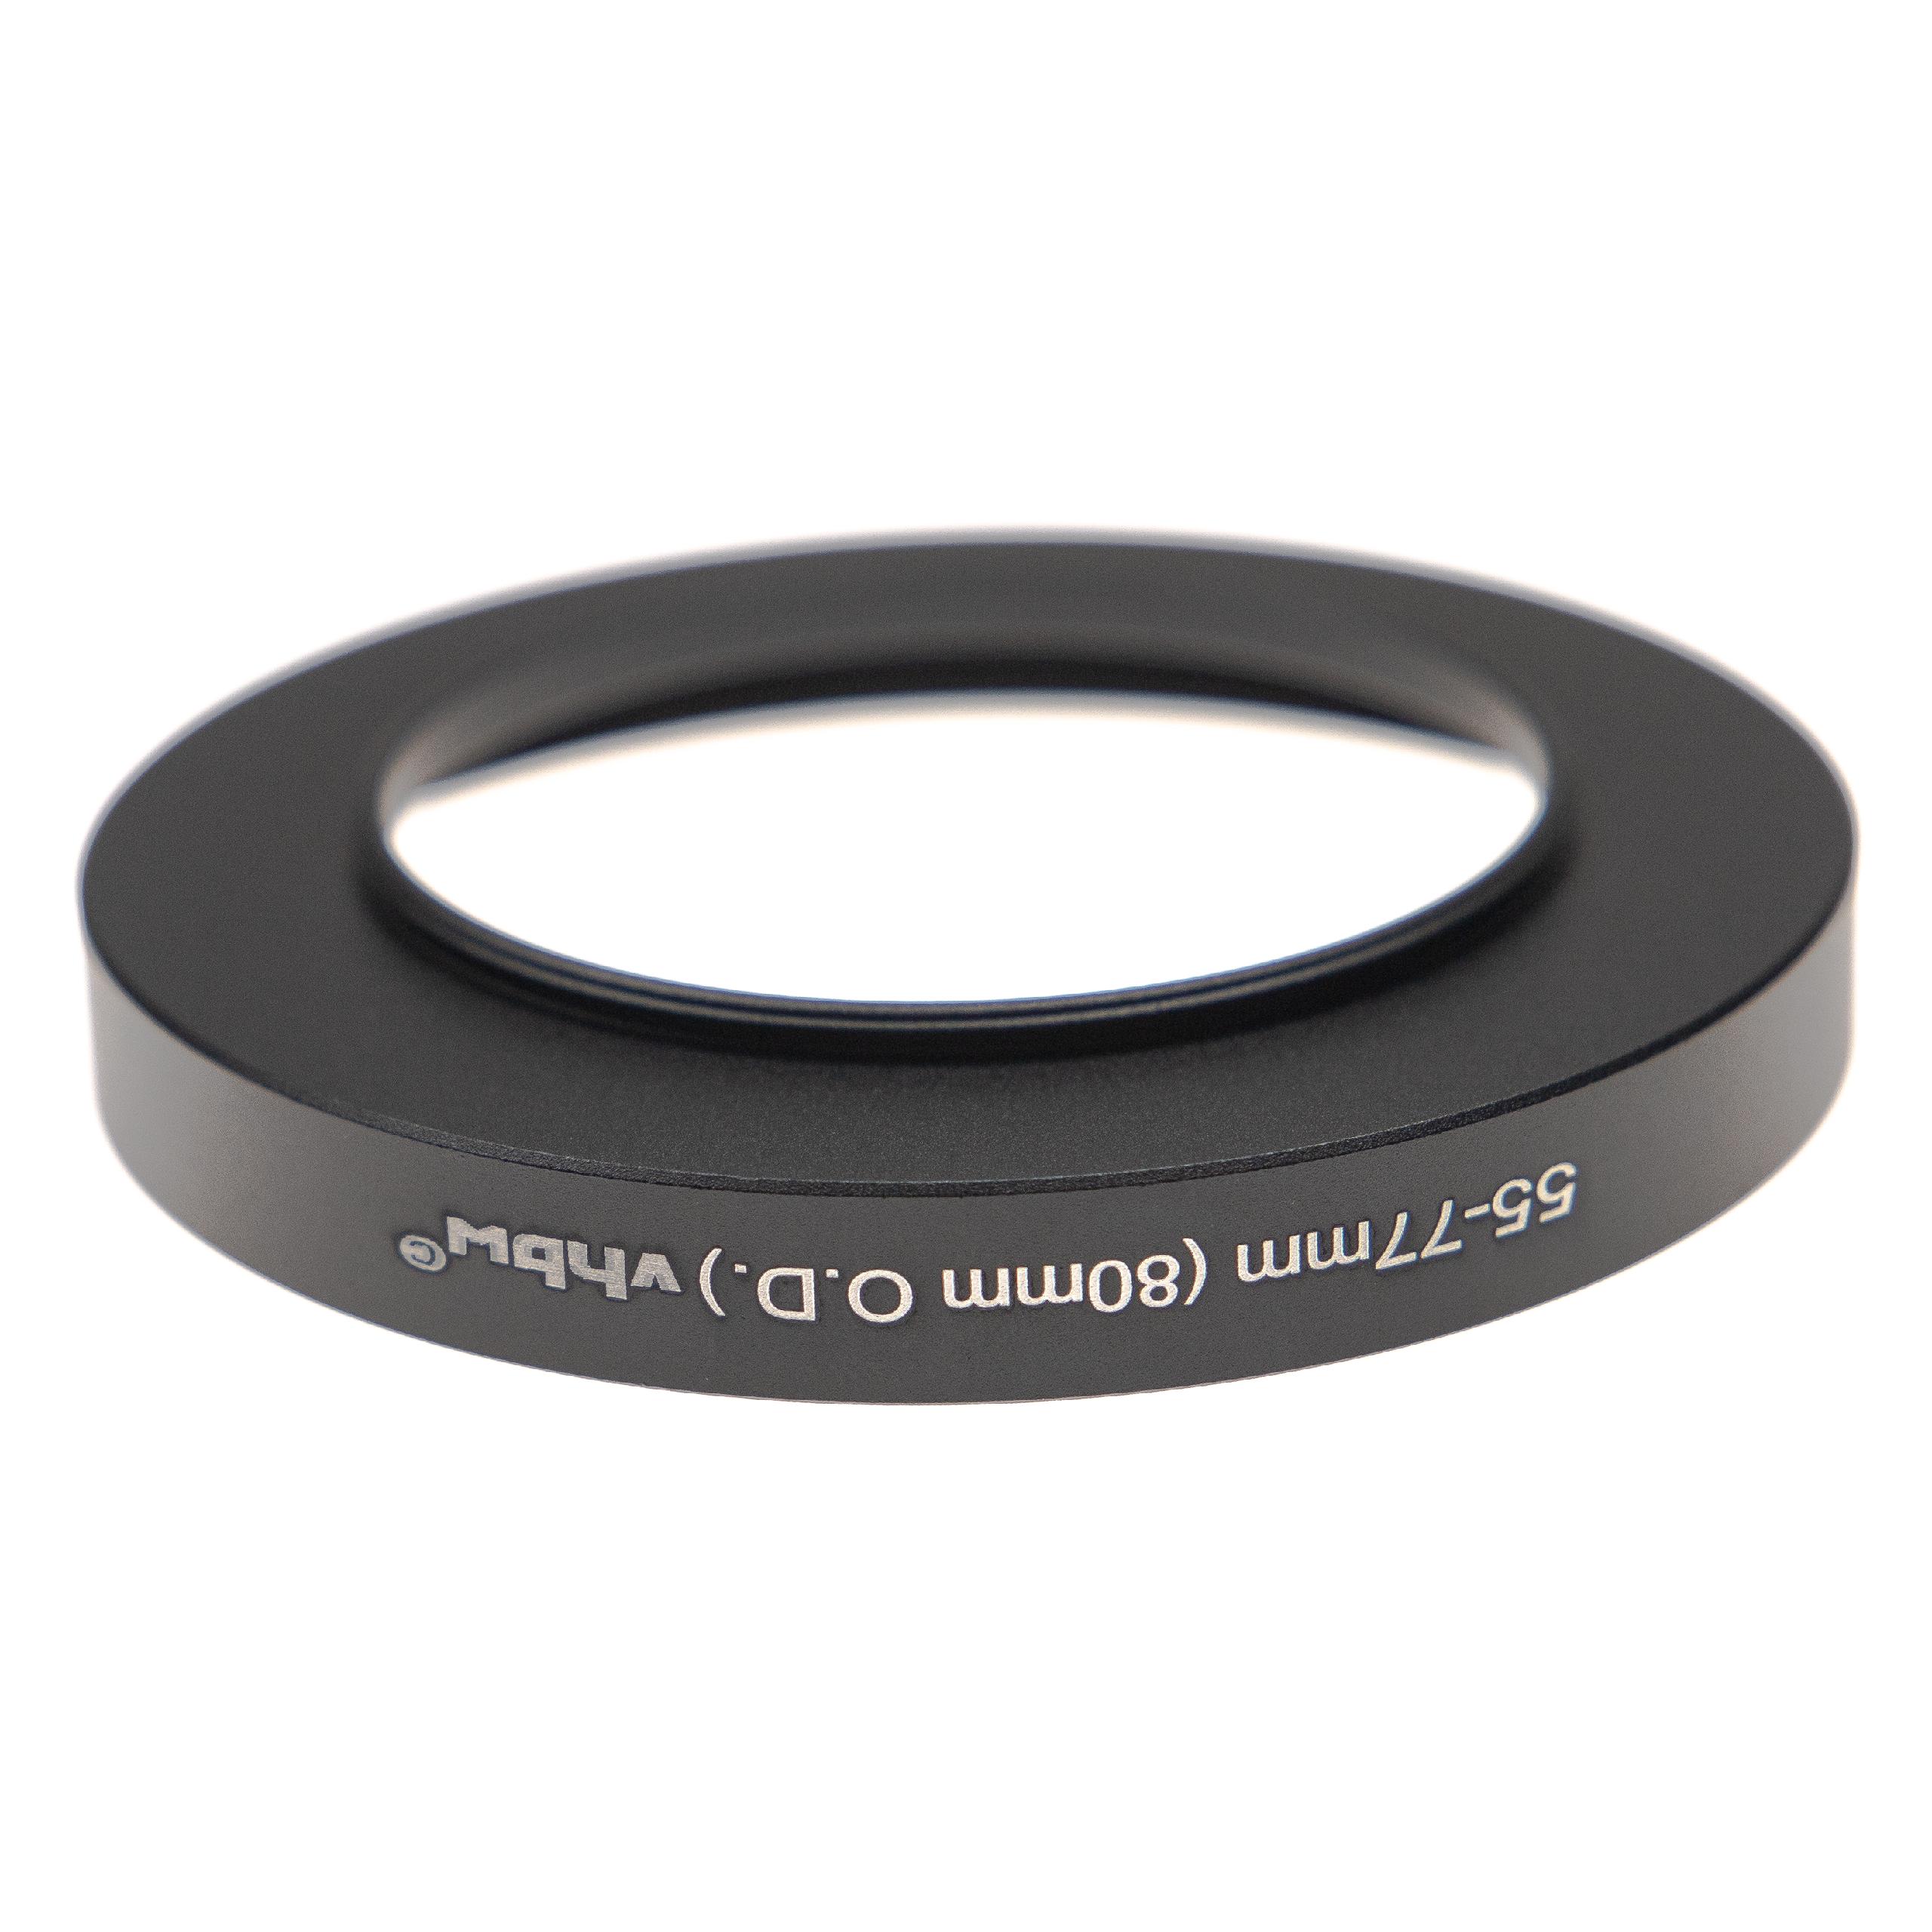 Step-Up Ring Adapter of 55 mm to 77 mm for matte box 80 mm O.D. - Filter Adapter